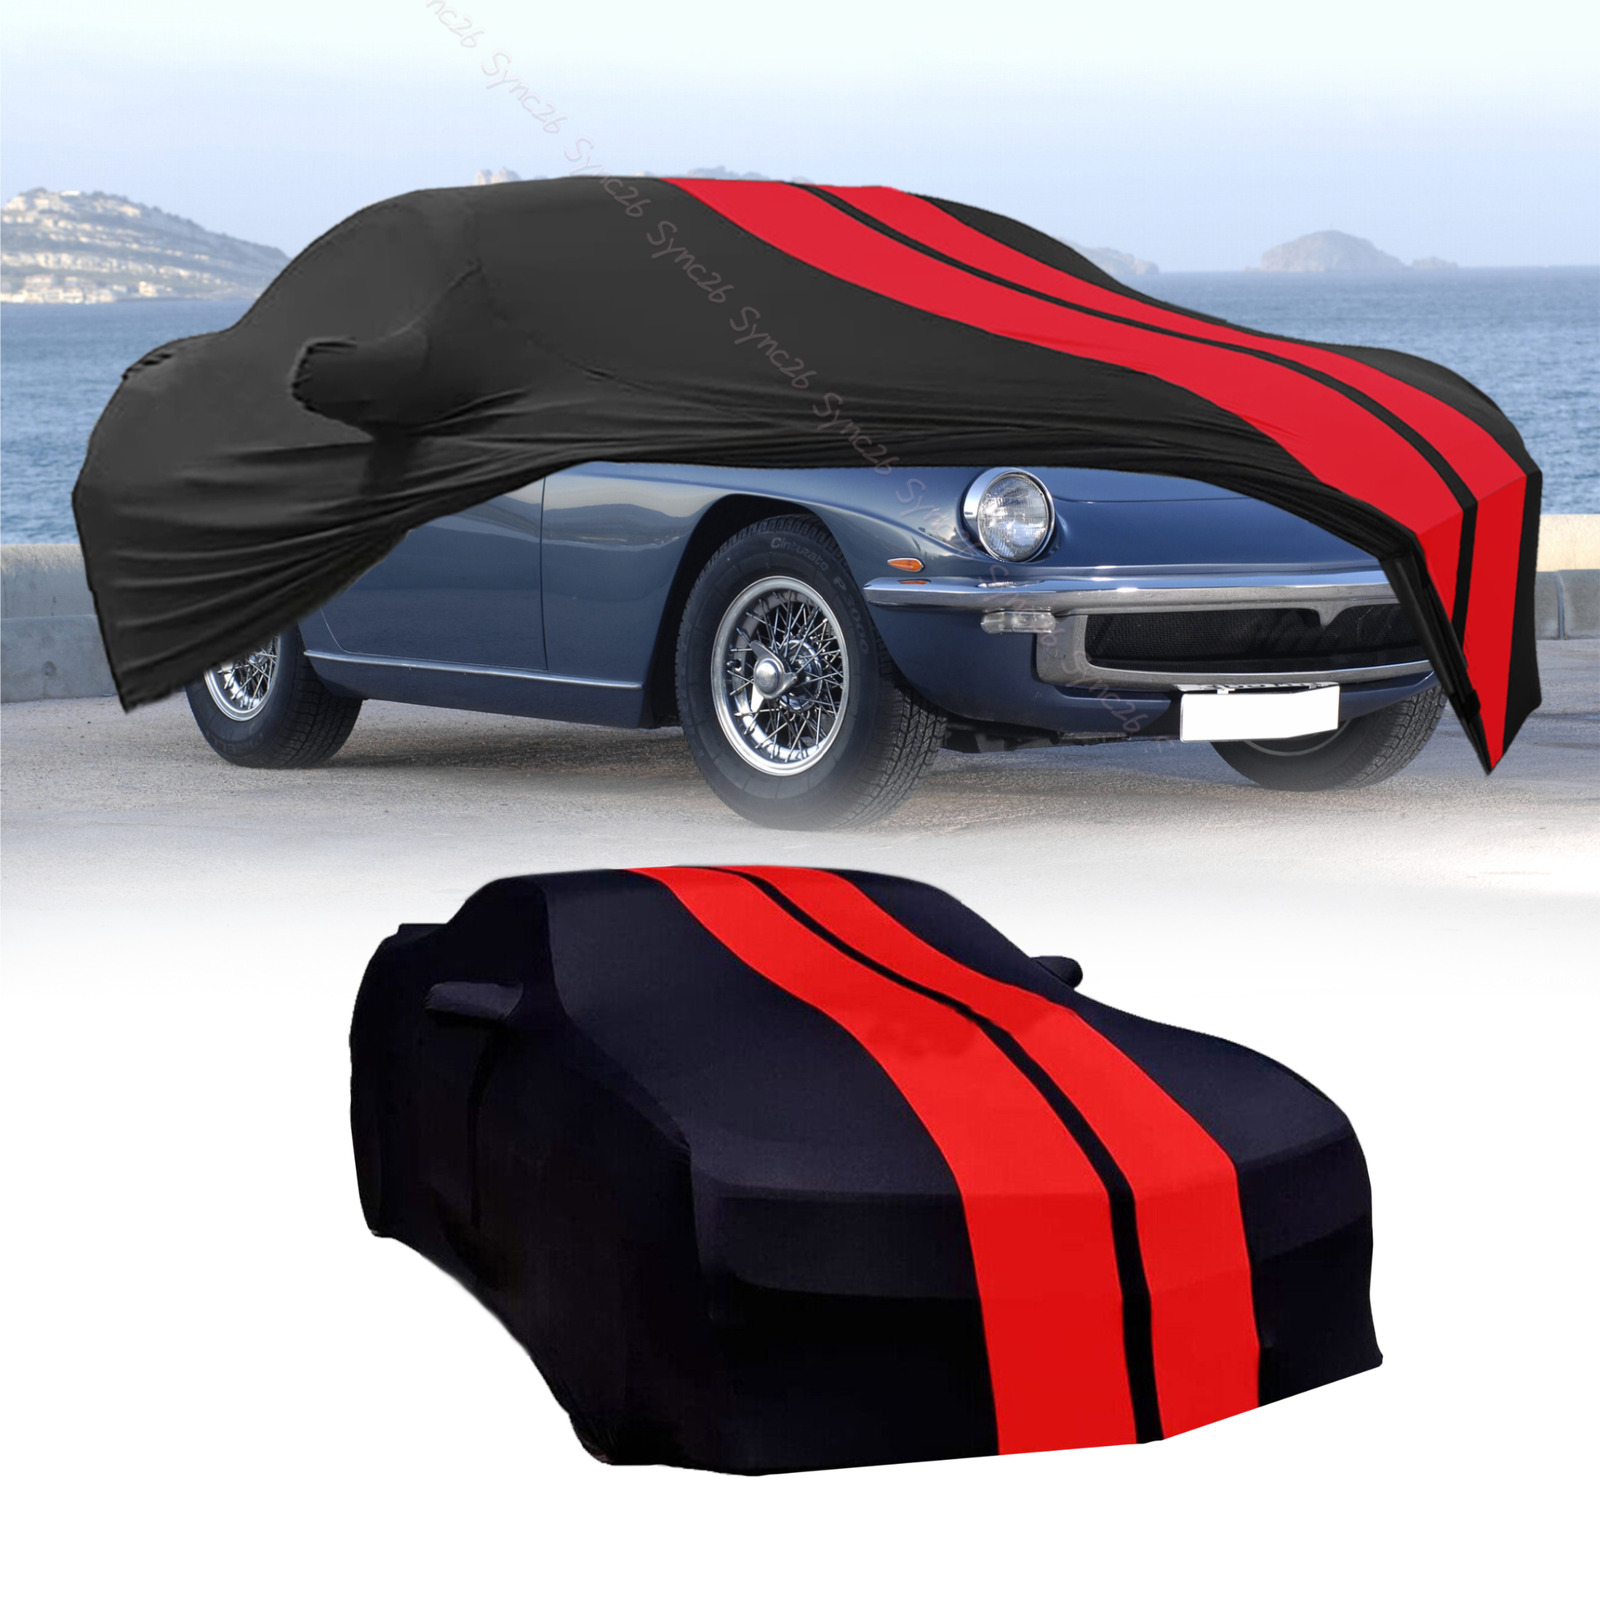 For Maserati Spyder Red/Black Full Car Cover Satin Stretch Indoor Dust Proof A+